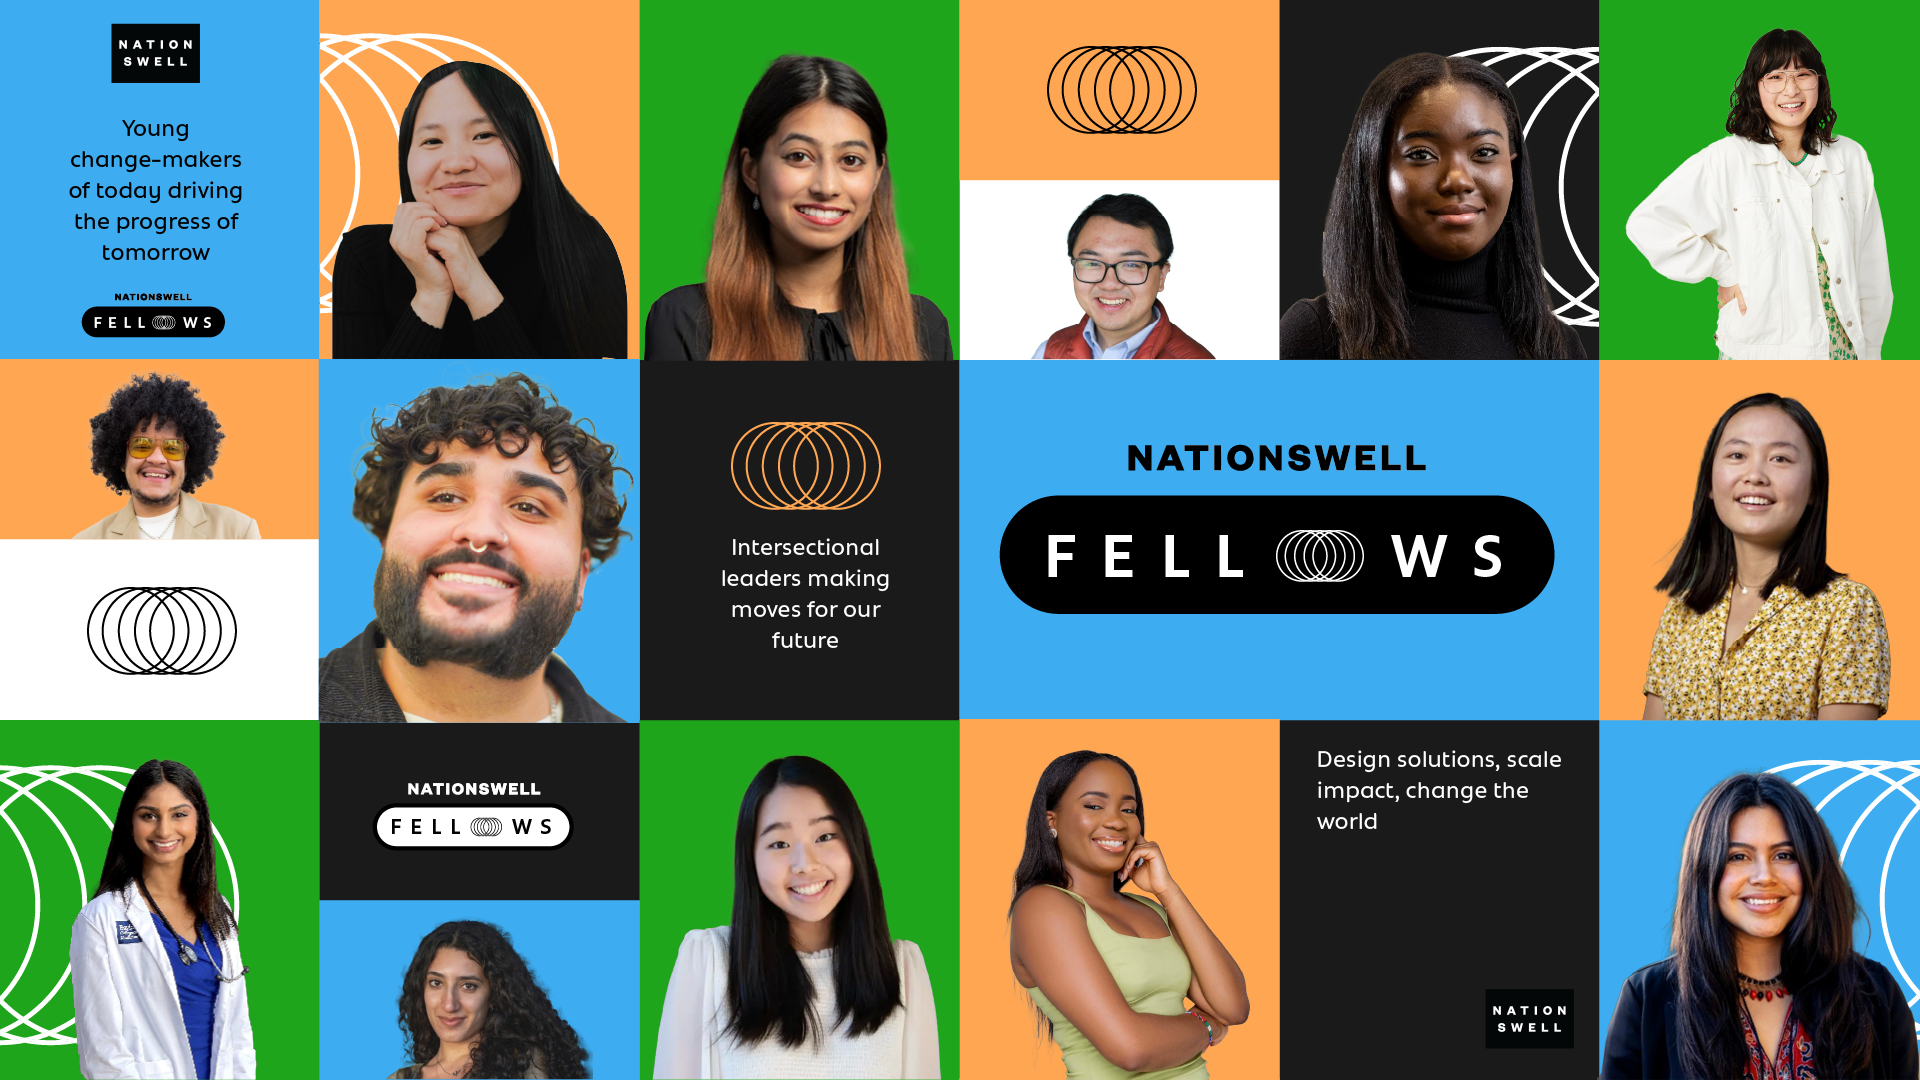 NationSwell Fellows Program: Empowering Young Leaders to Reach New Heights